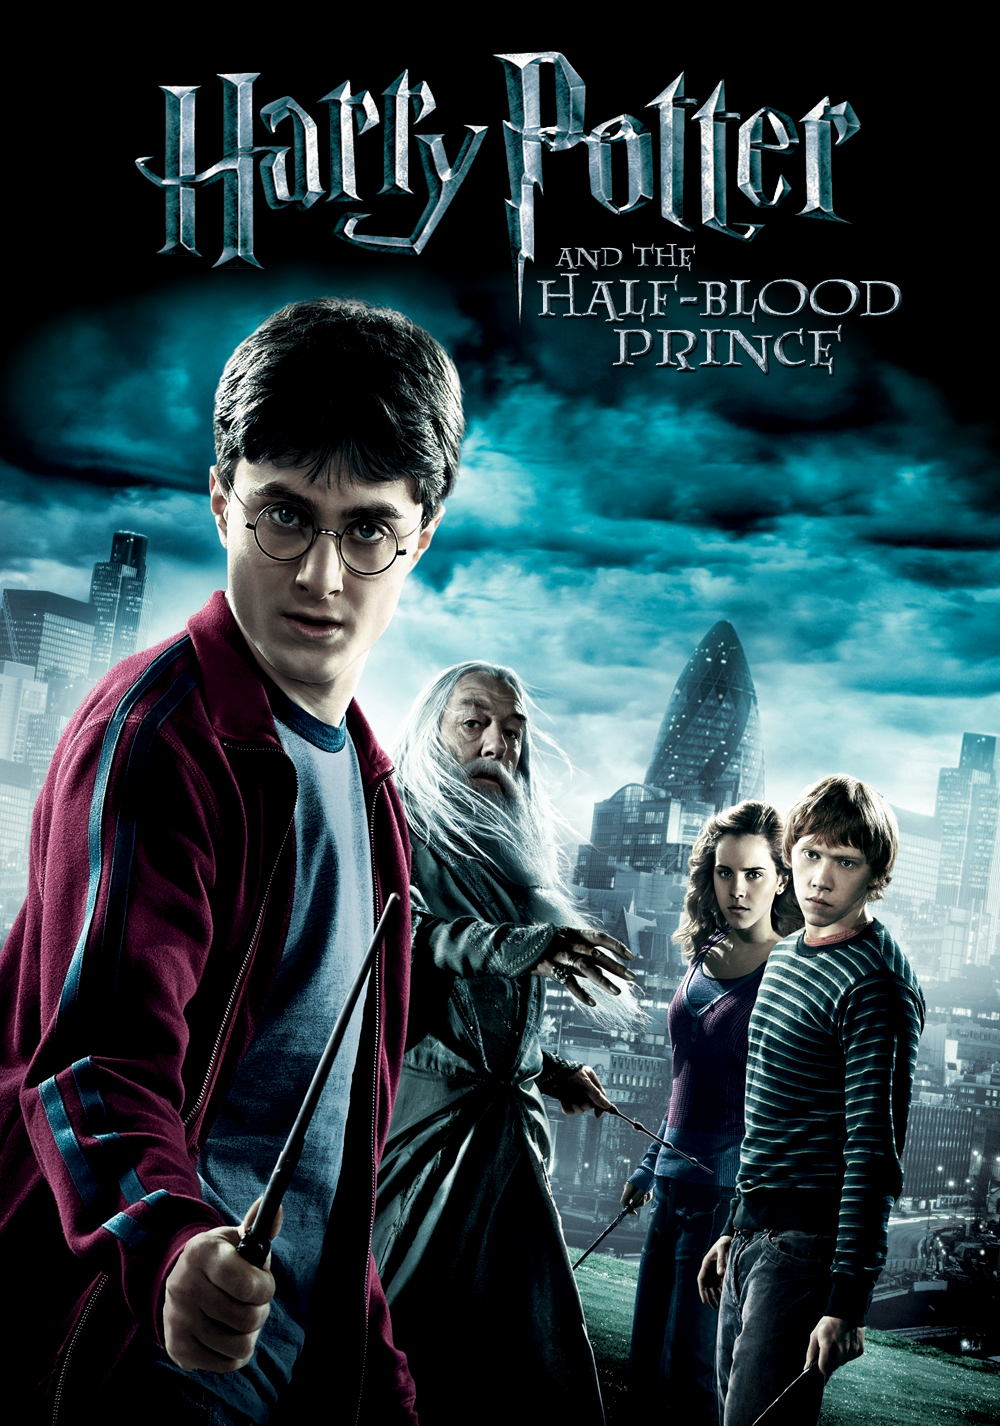 Harry Potter and The Half-Blood Prince (2009) 1080p Dual Audio (Hindi